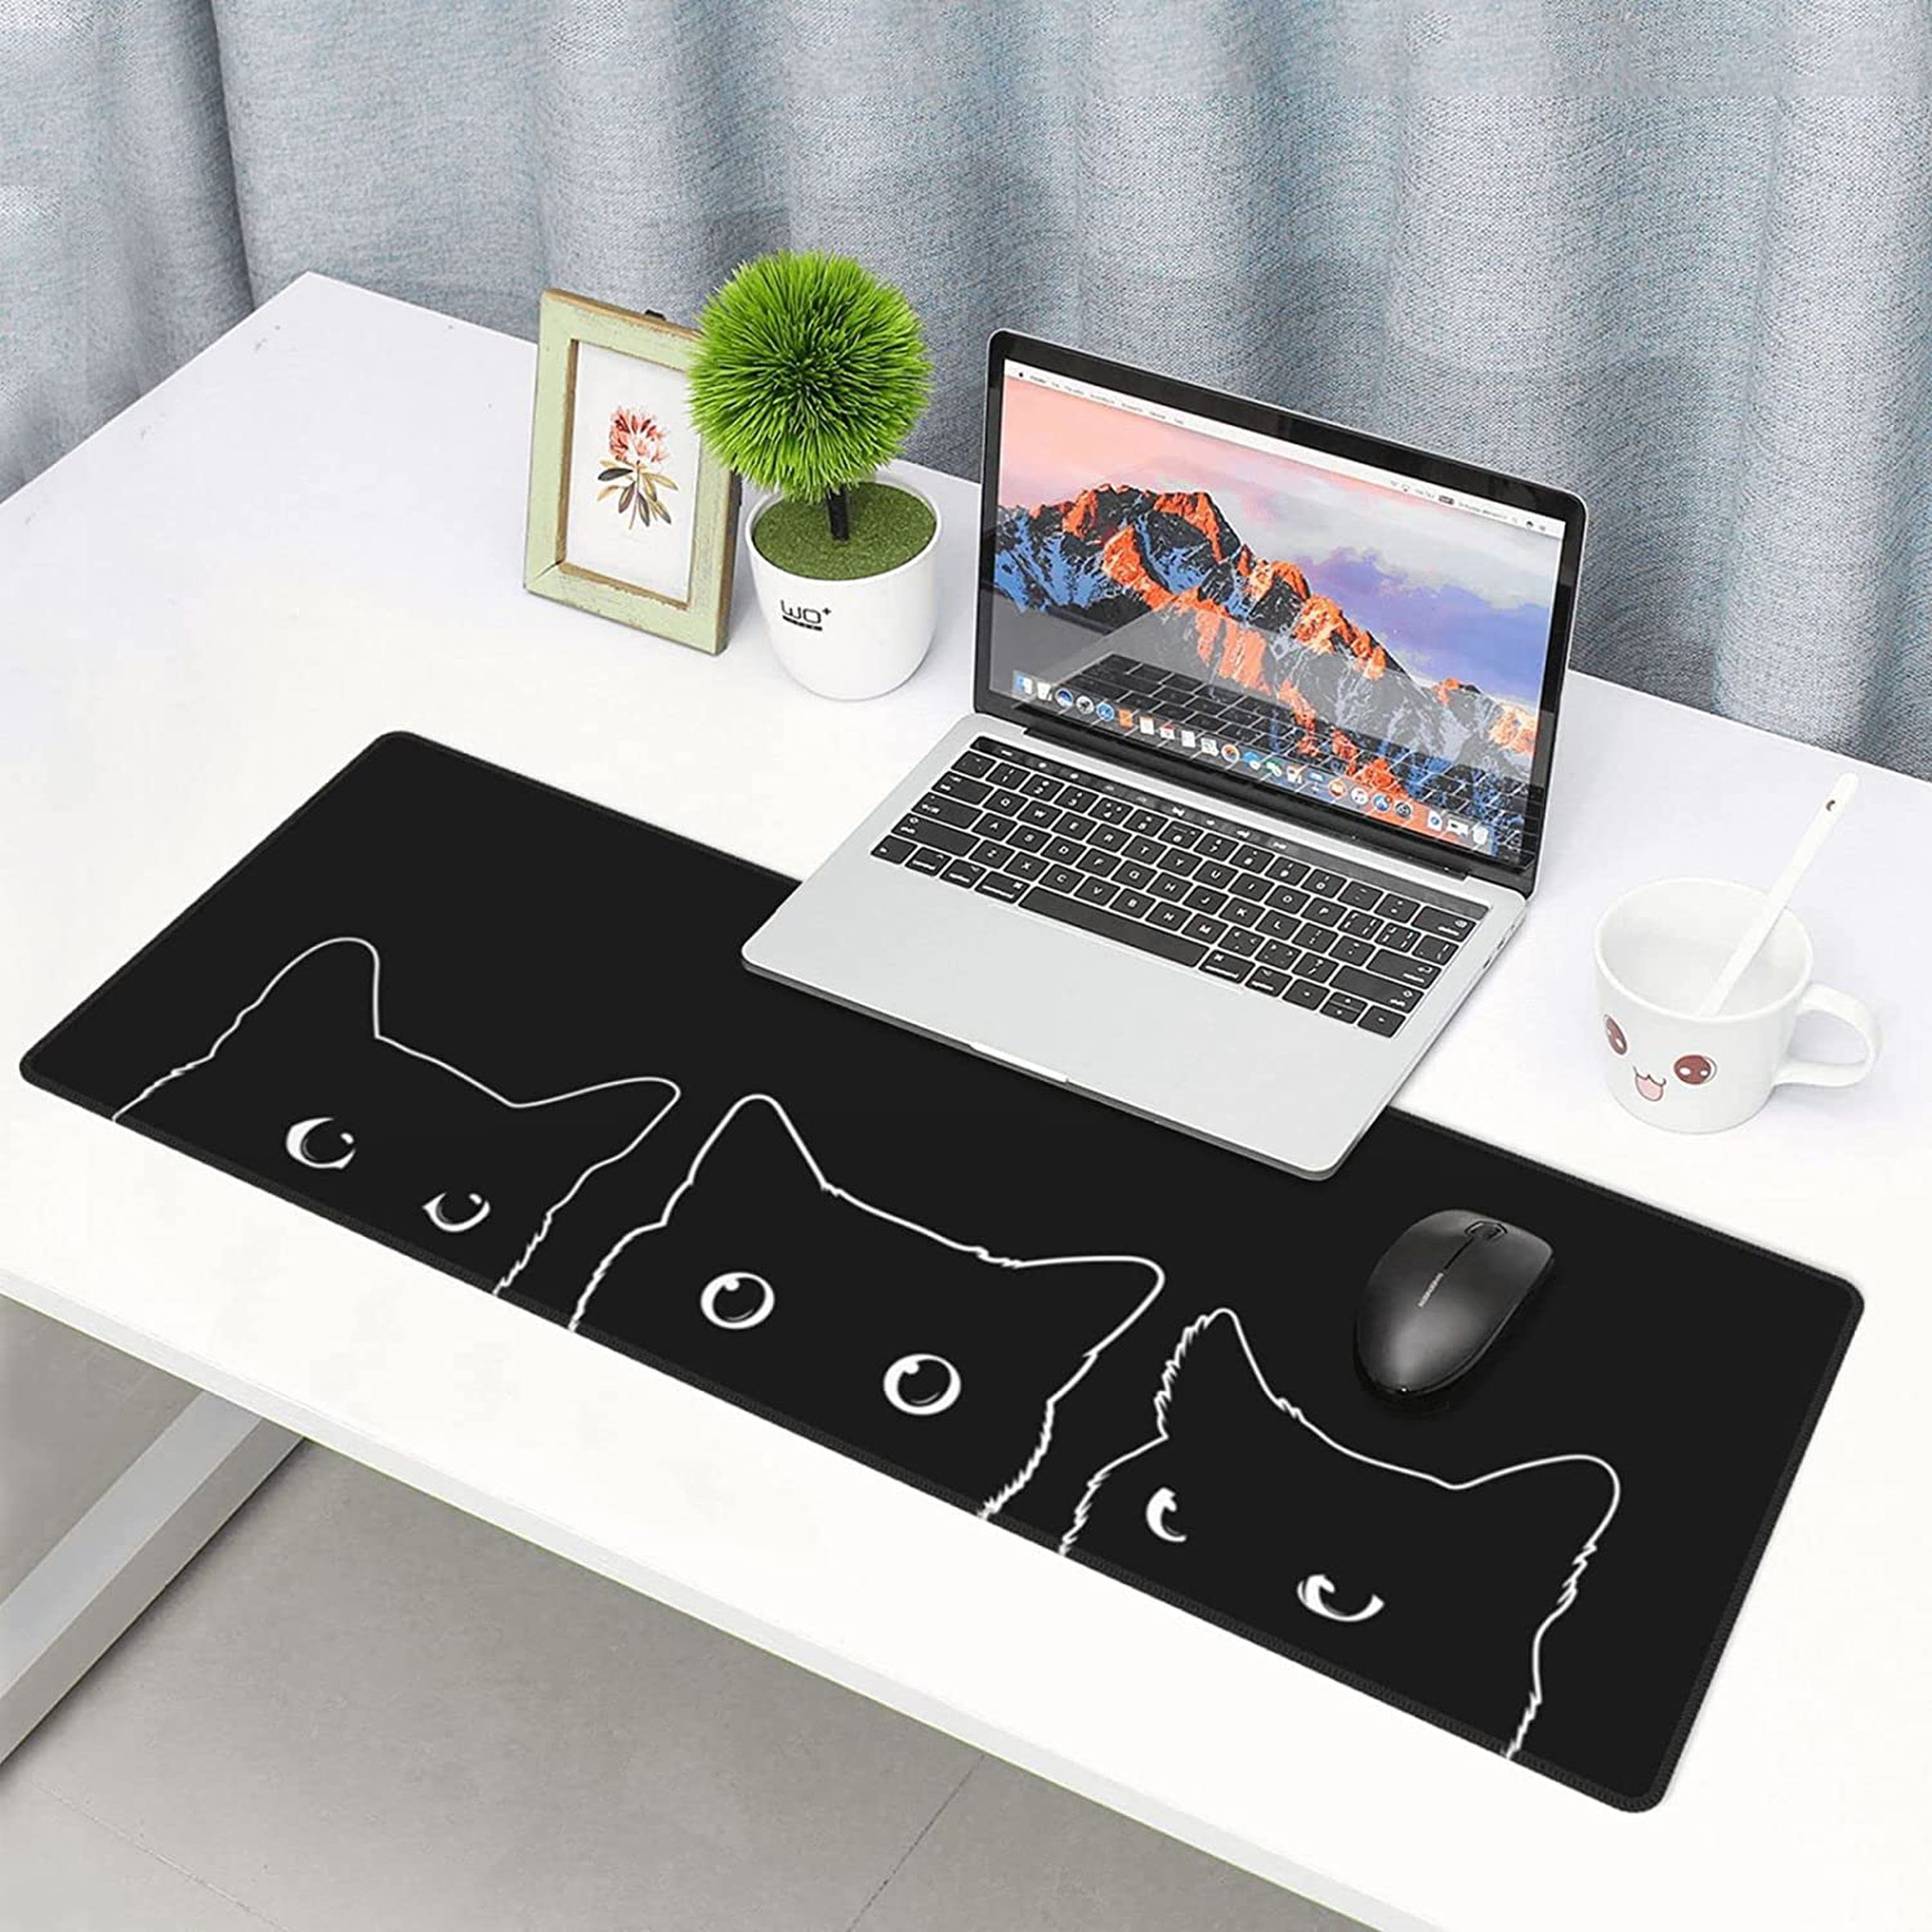 A long black mouse pad with the outlines of three cats on it on a white desk with a laptop, a plant, and a small framed picture.